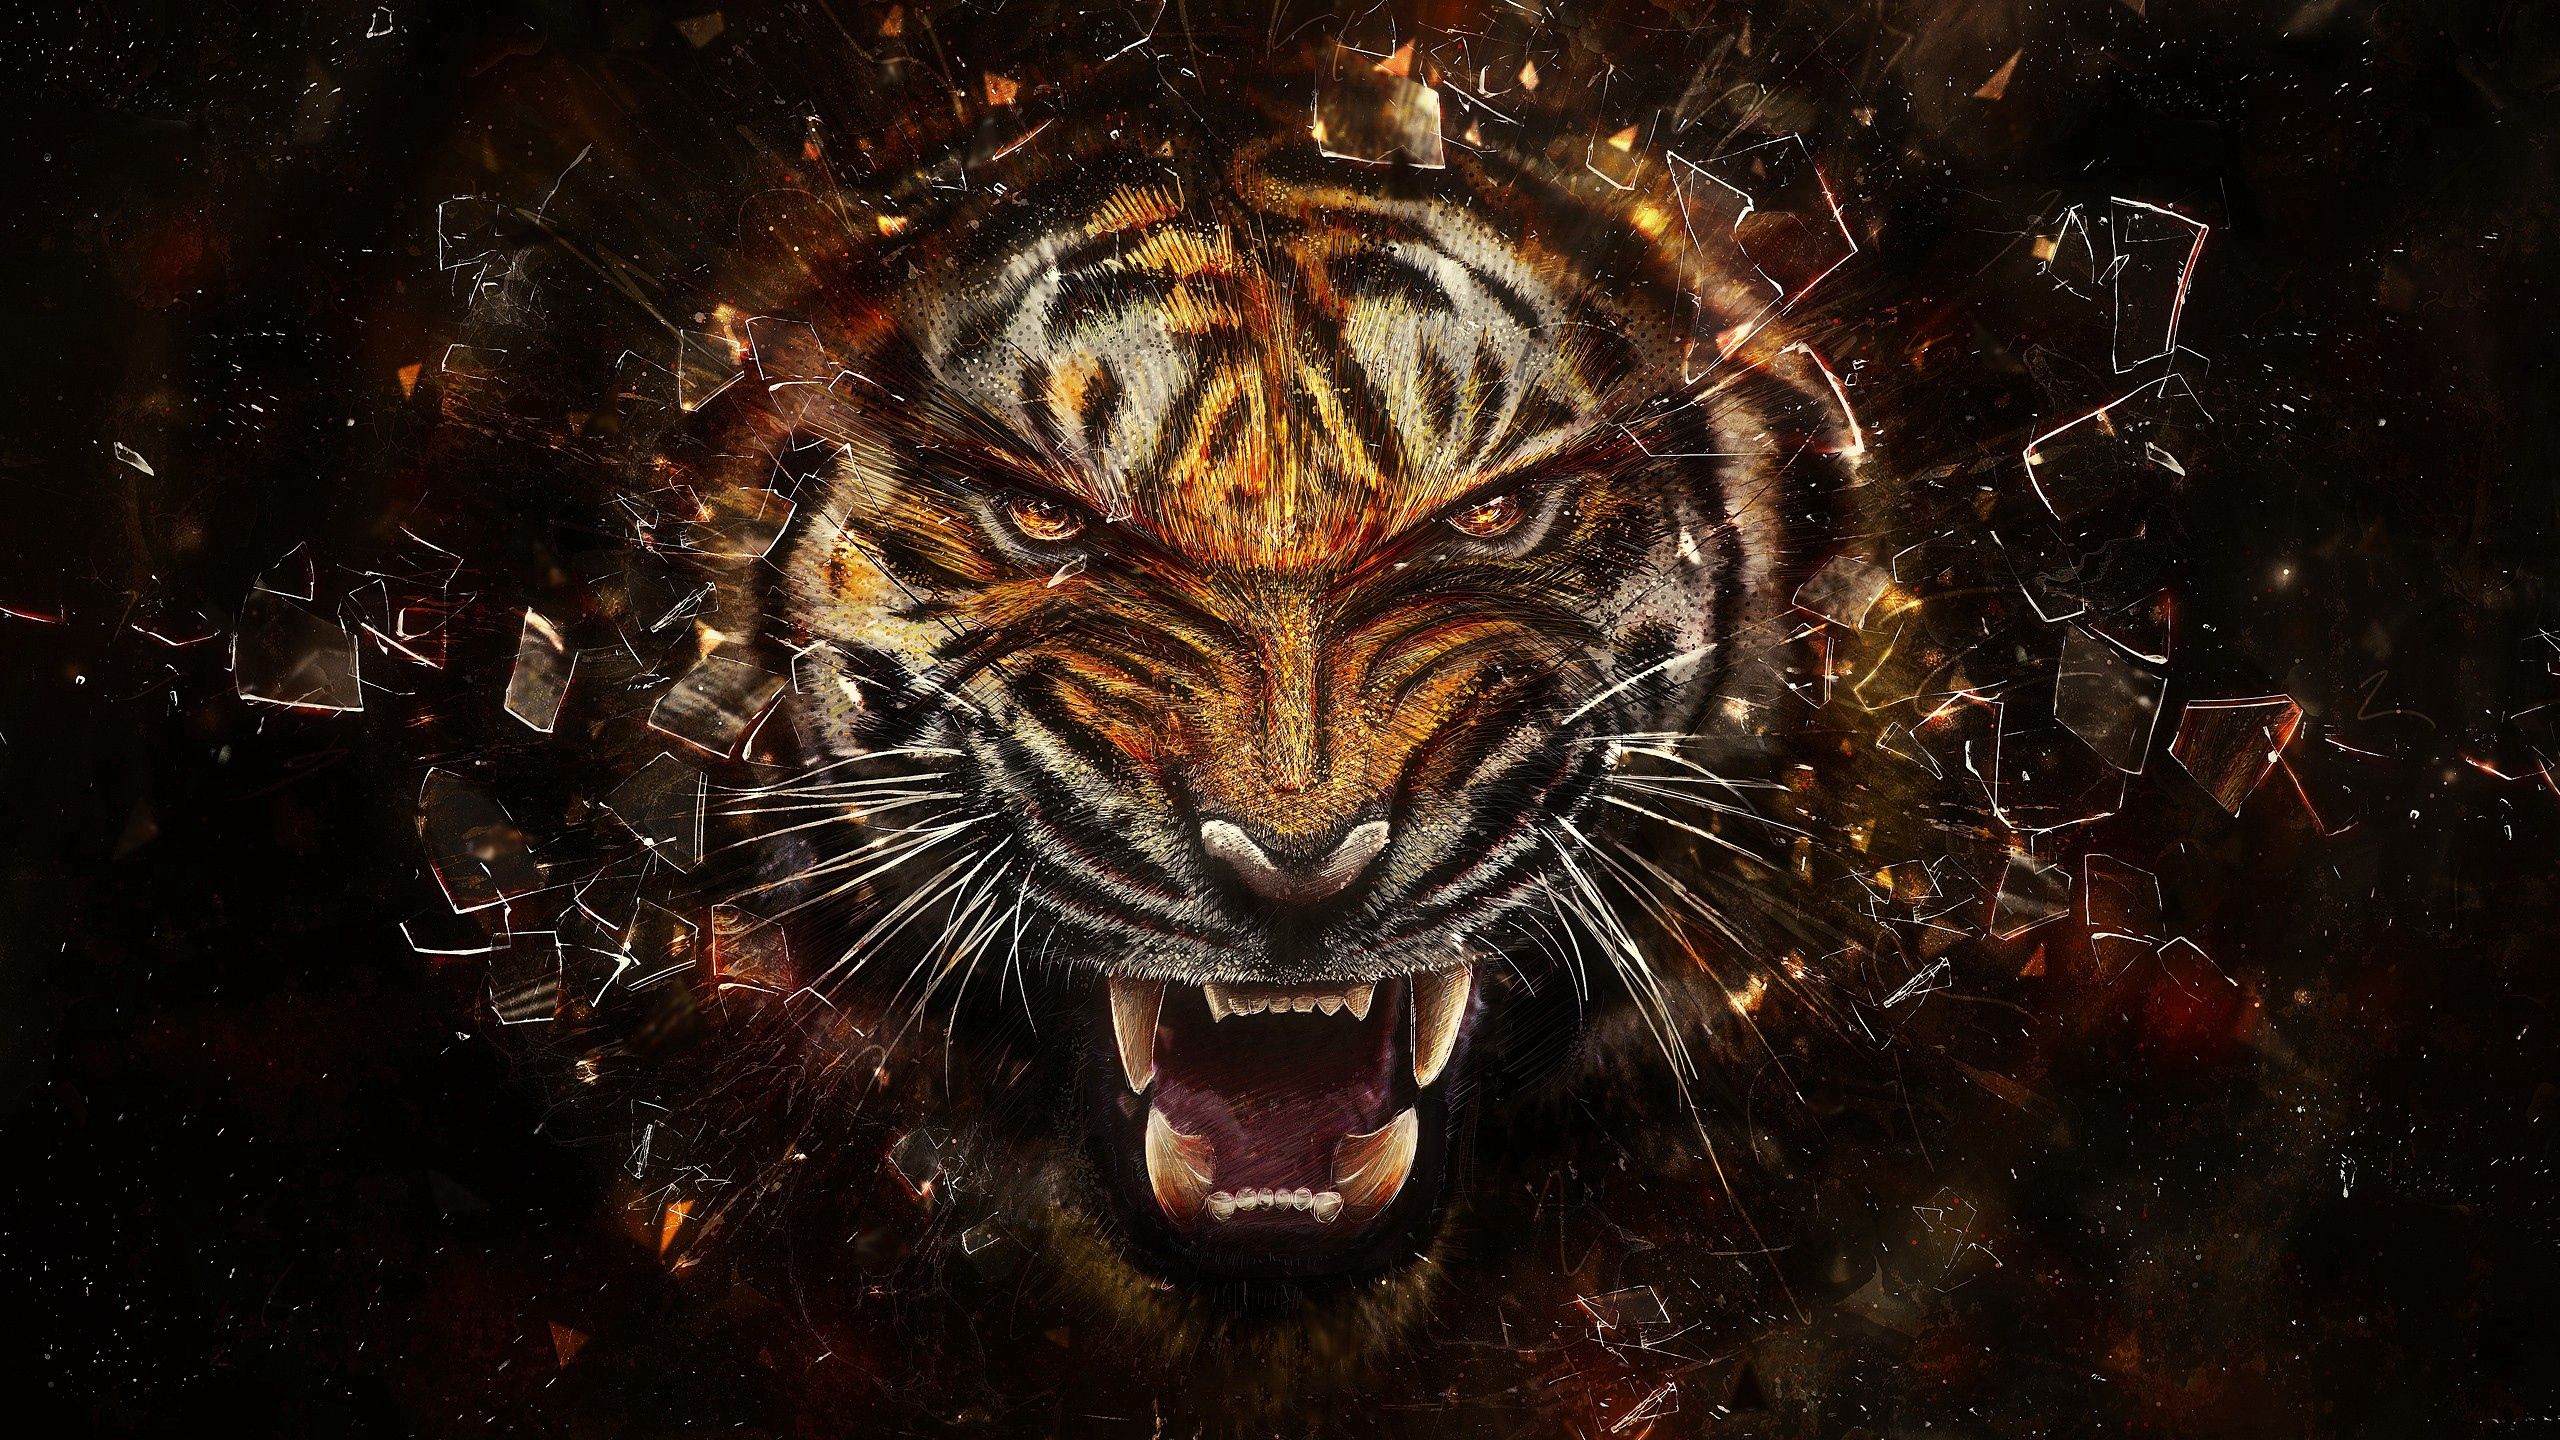 95682 download wallpaper abstract, tiger, aggression, grin, glass, shards, smithereens screensavers and pictures for free